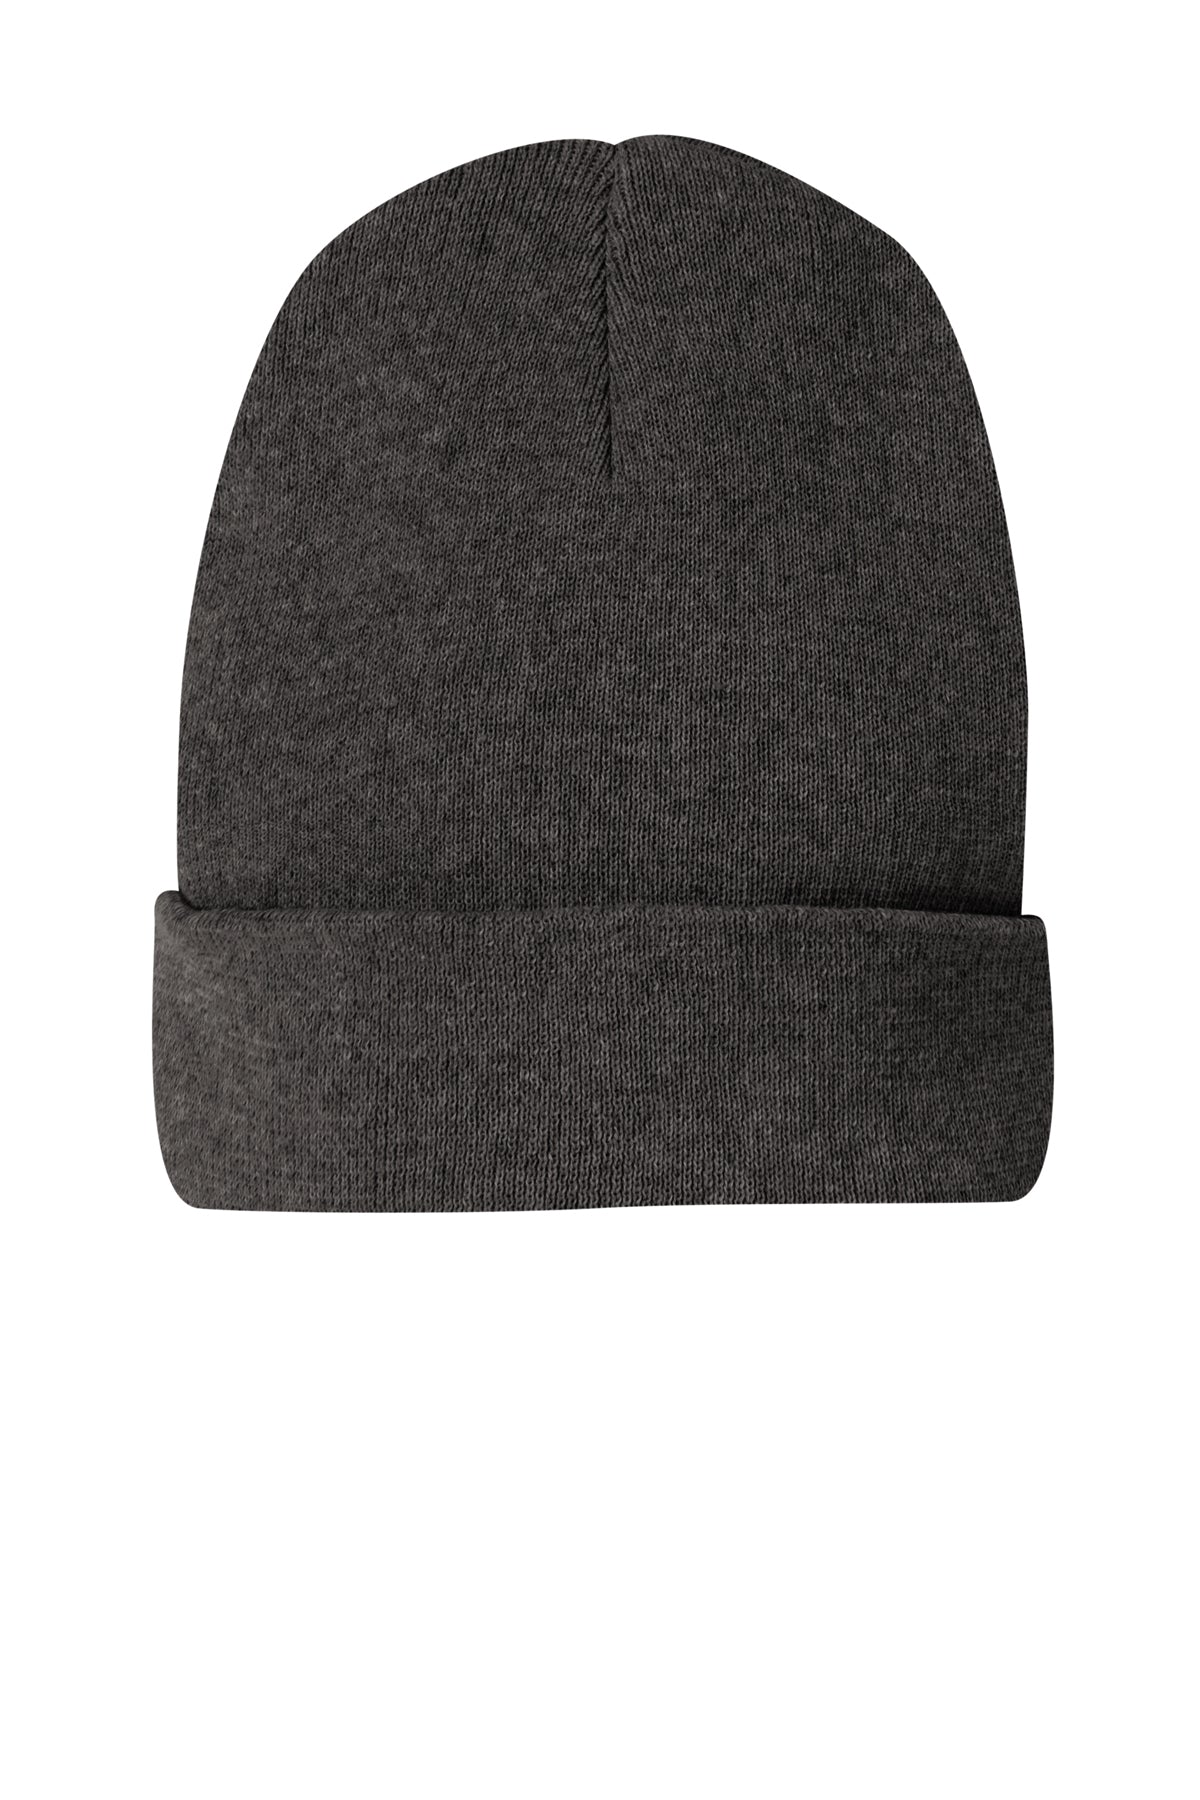 District® DT815 Re-Beanie™ Charcoal